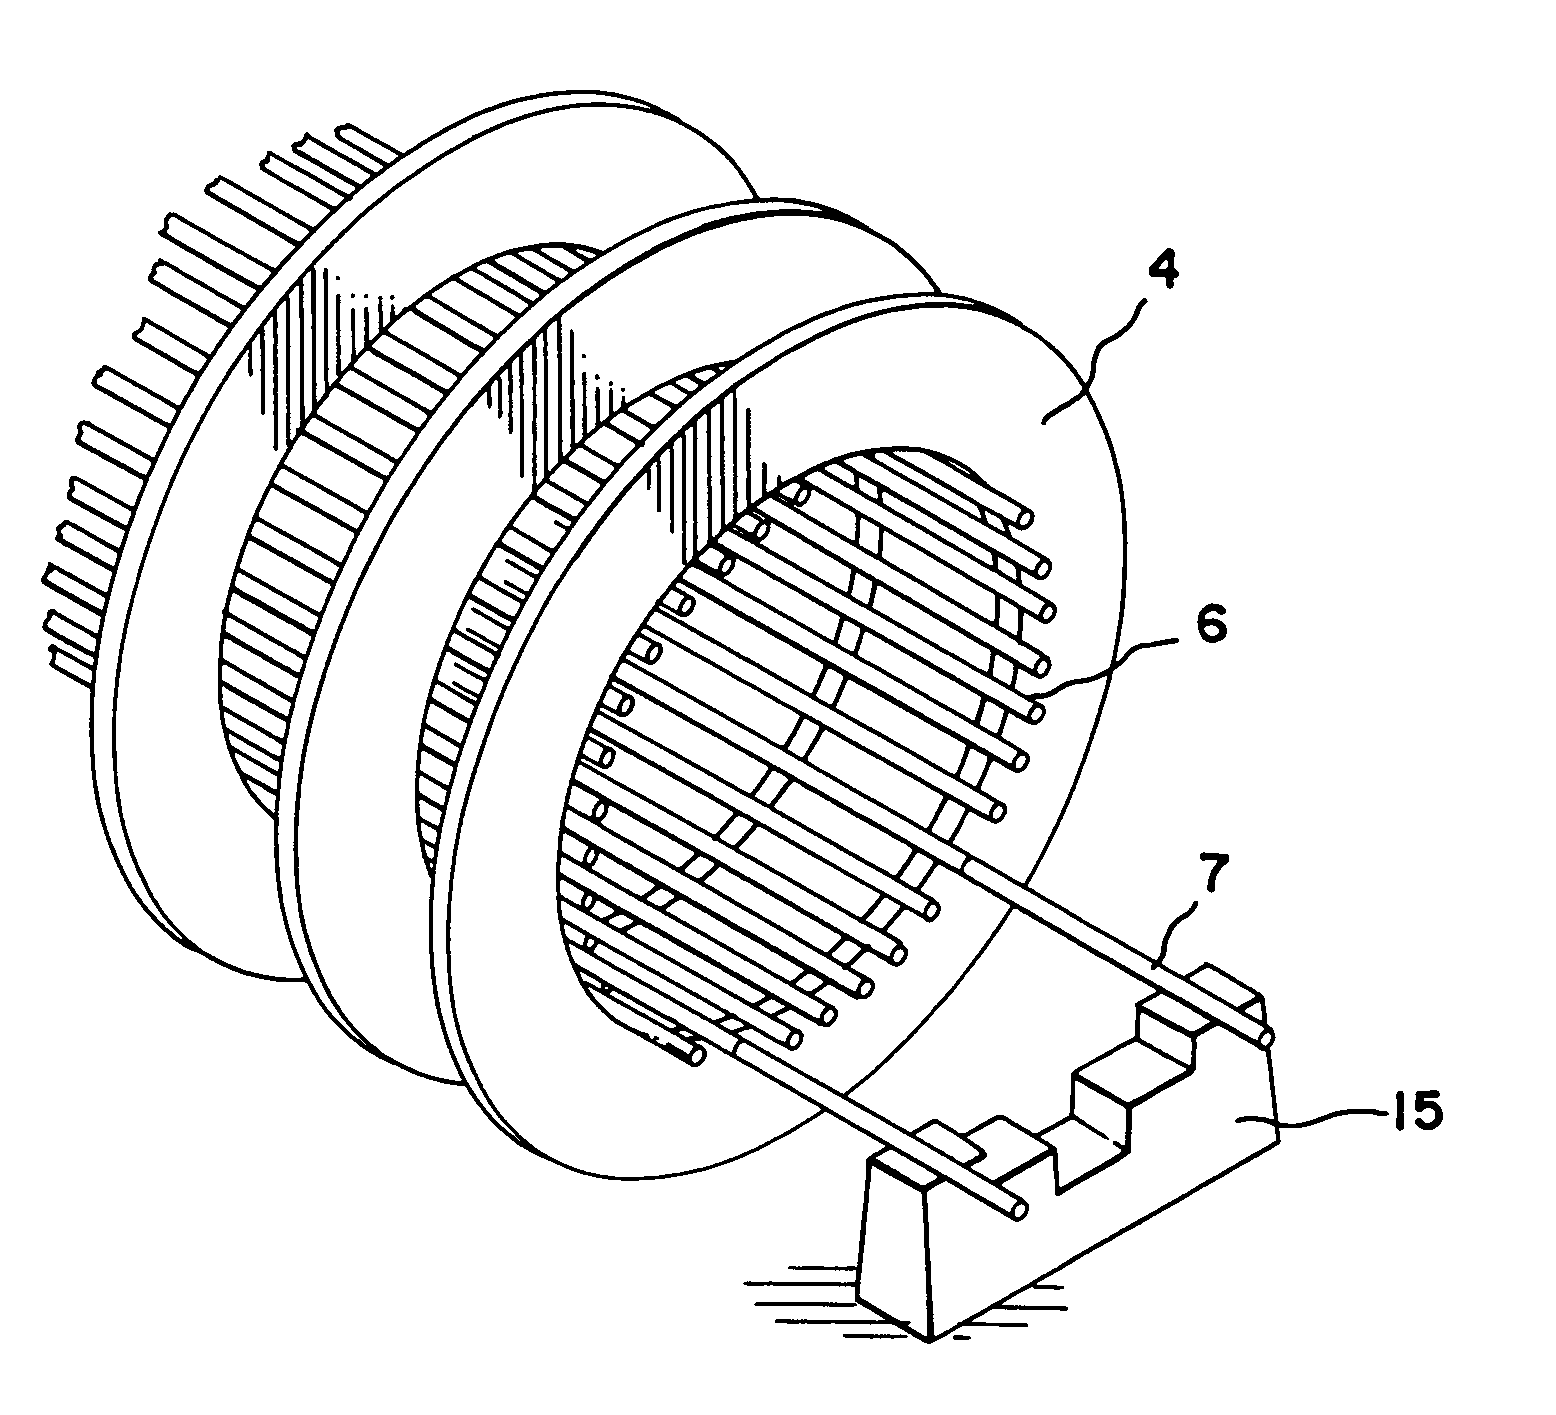 Method of horizontally stacking a stator core within a stator frame